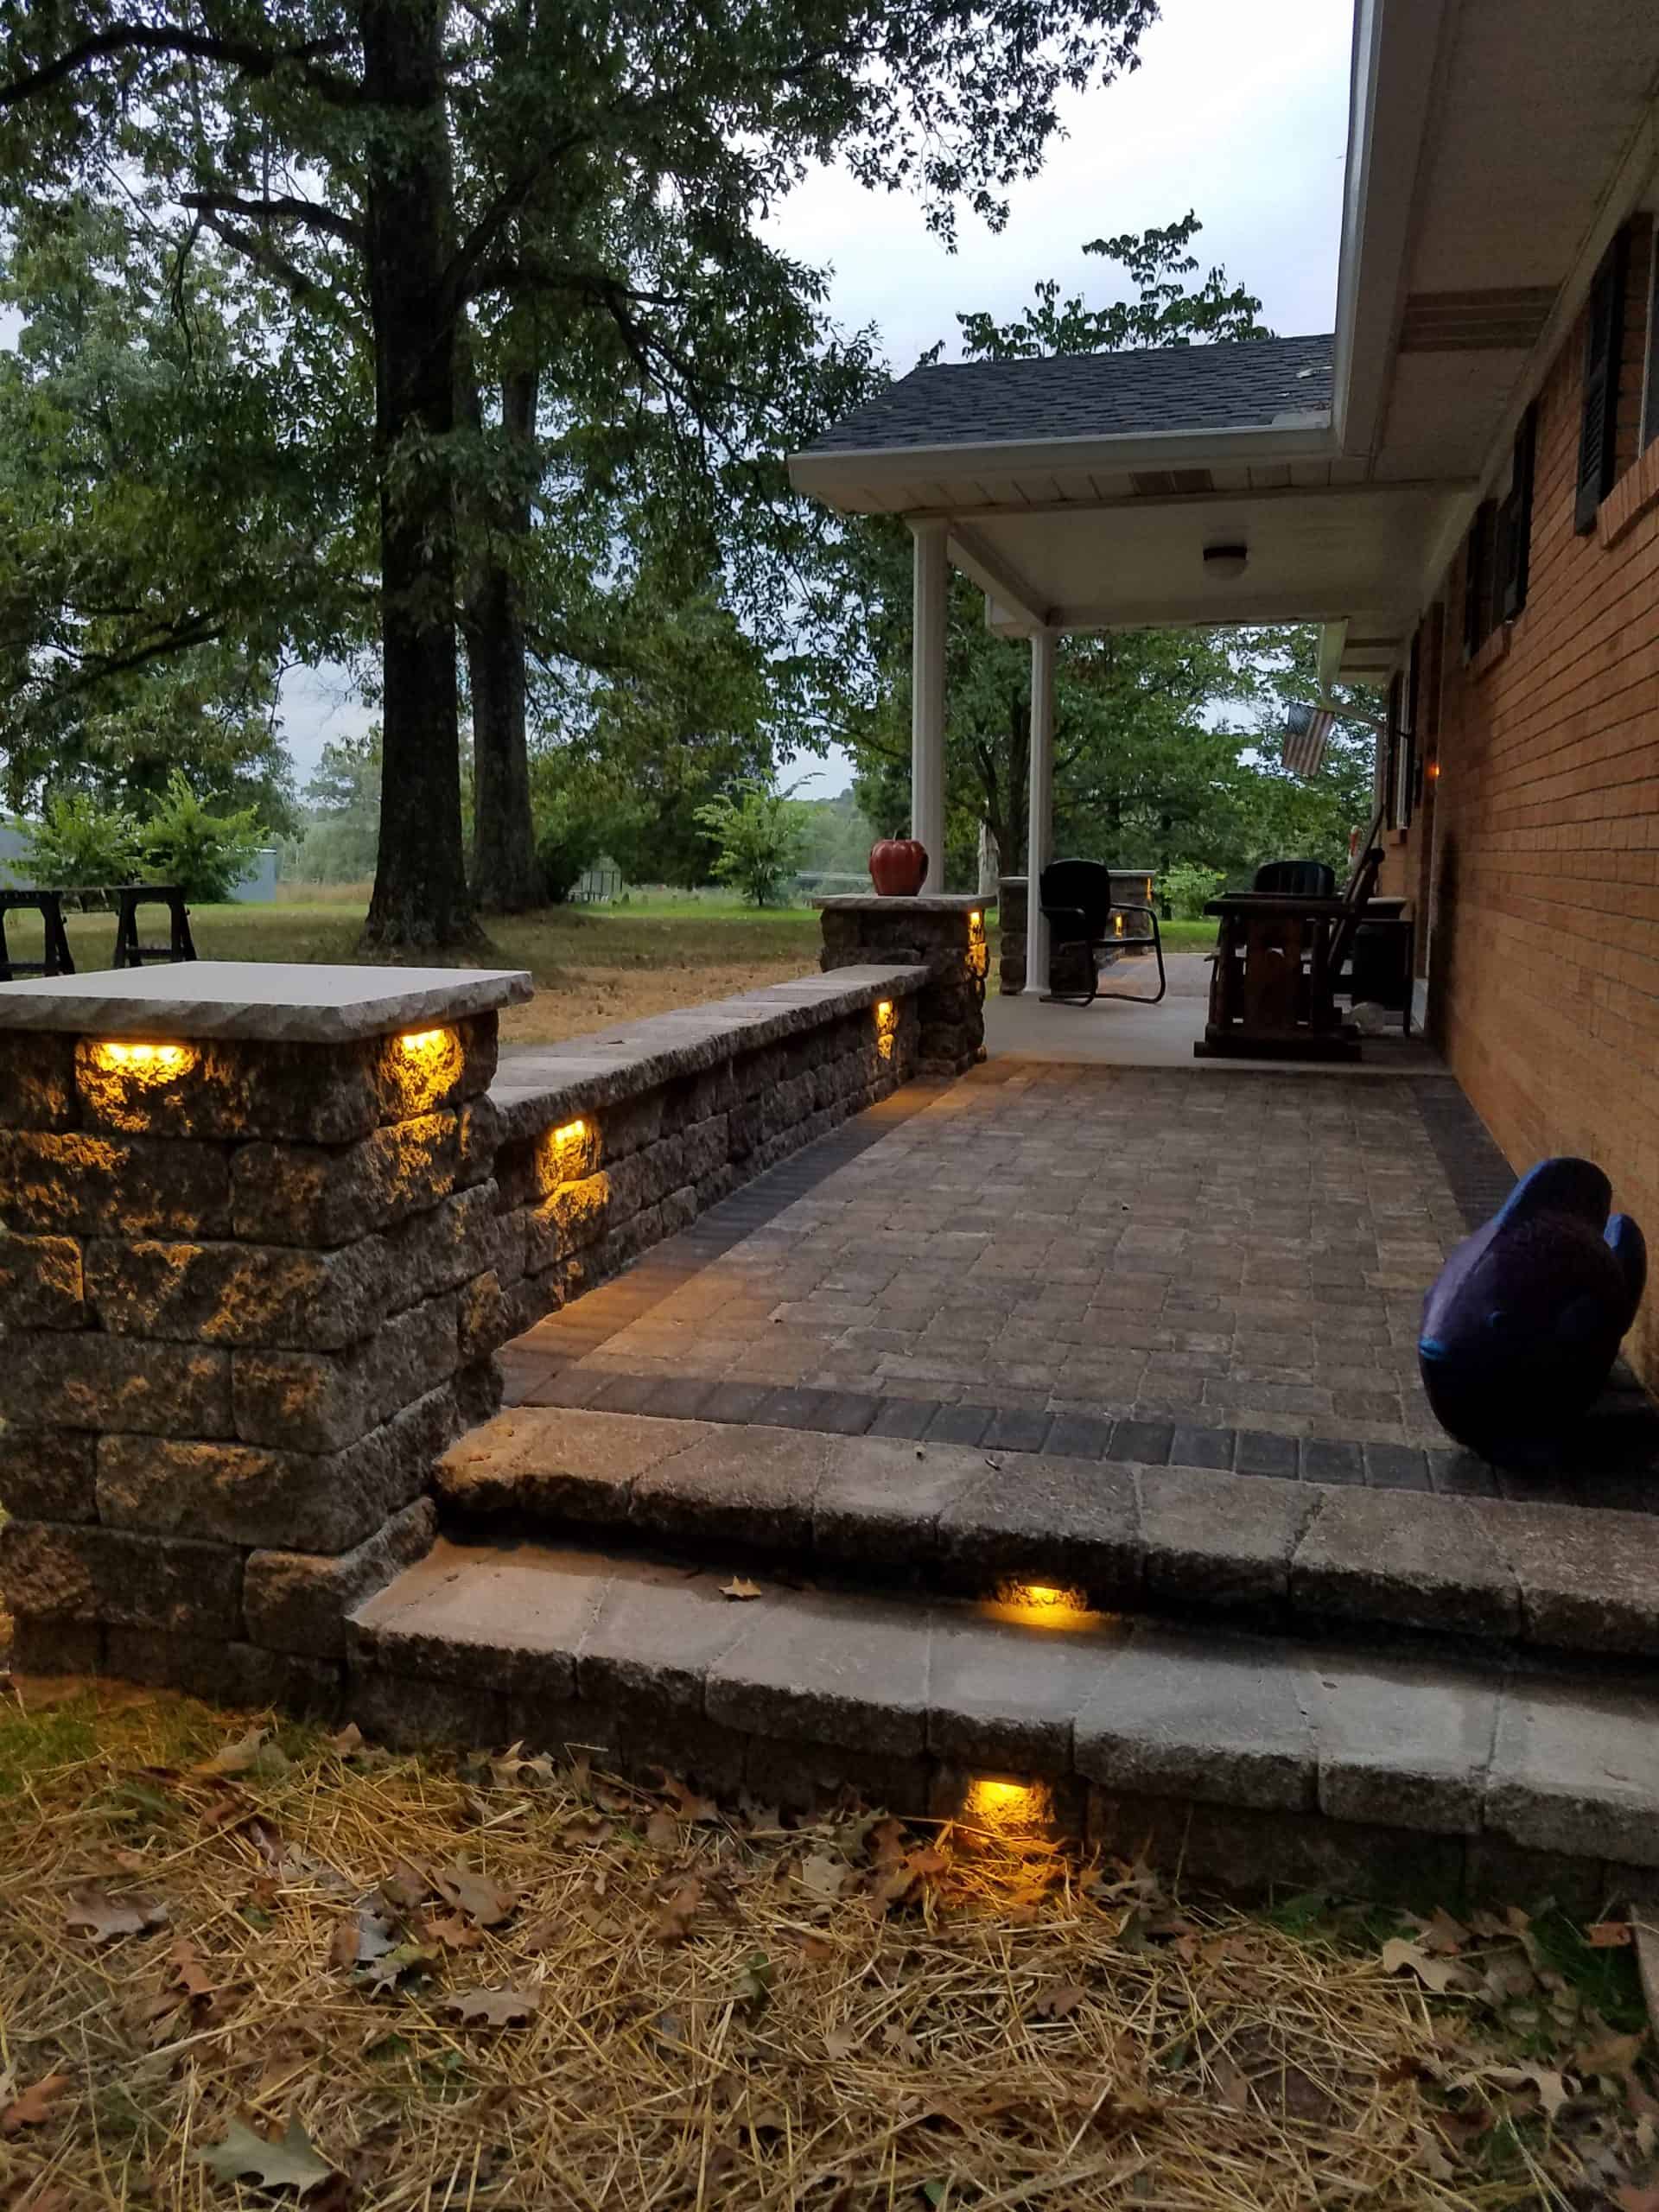 Achieving perfect outdoor lighting